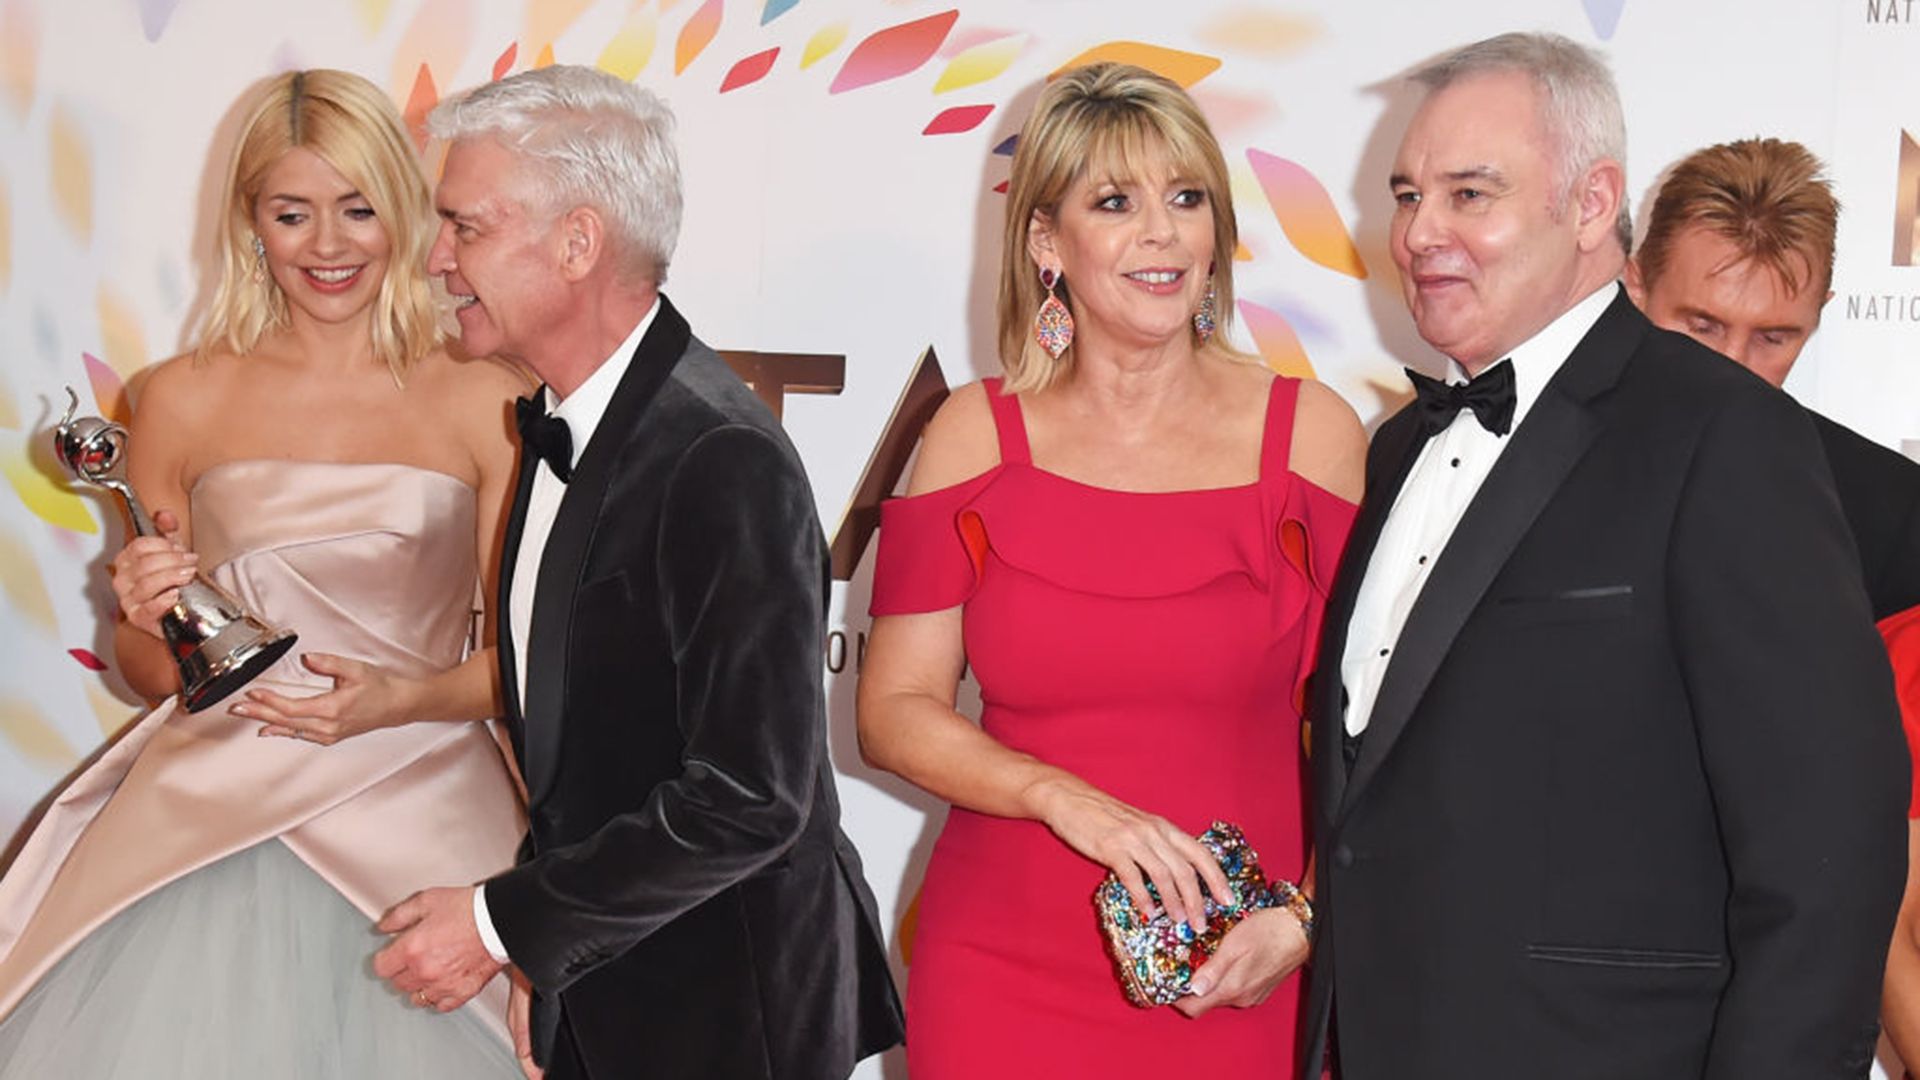 Holly Willoughby, Phillip Schofield, Ruth Langsford and Eamonn Holmes, accepting the Live Magazine Show award for This Morning